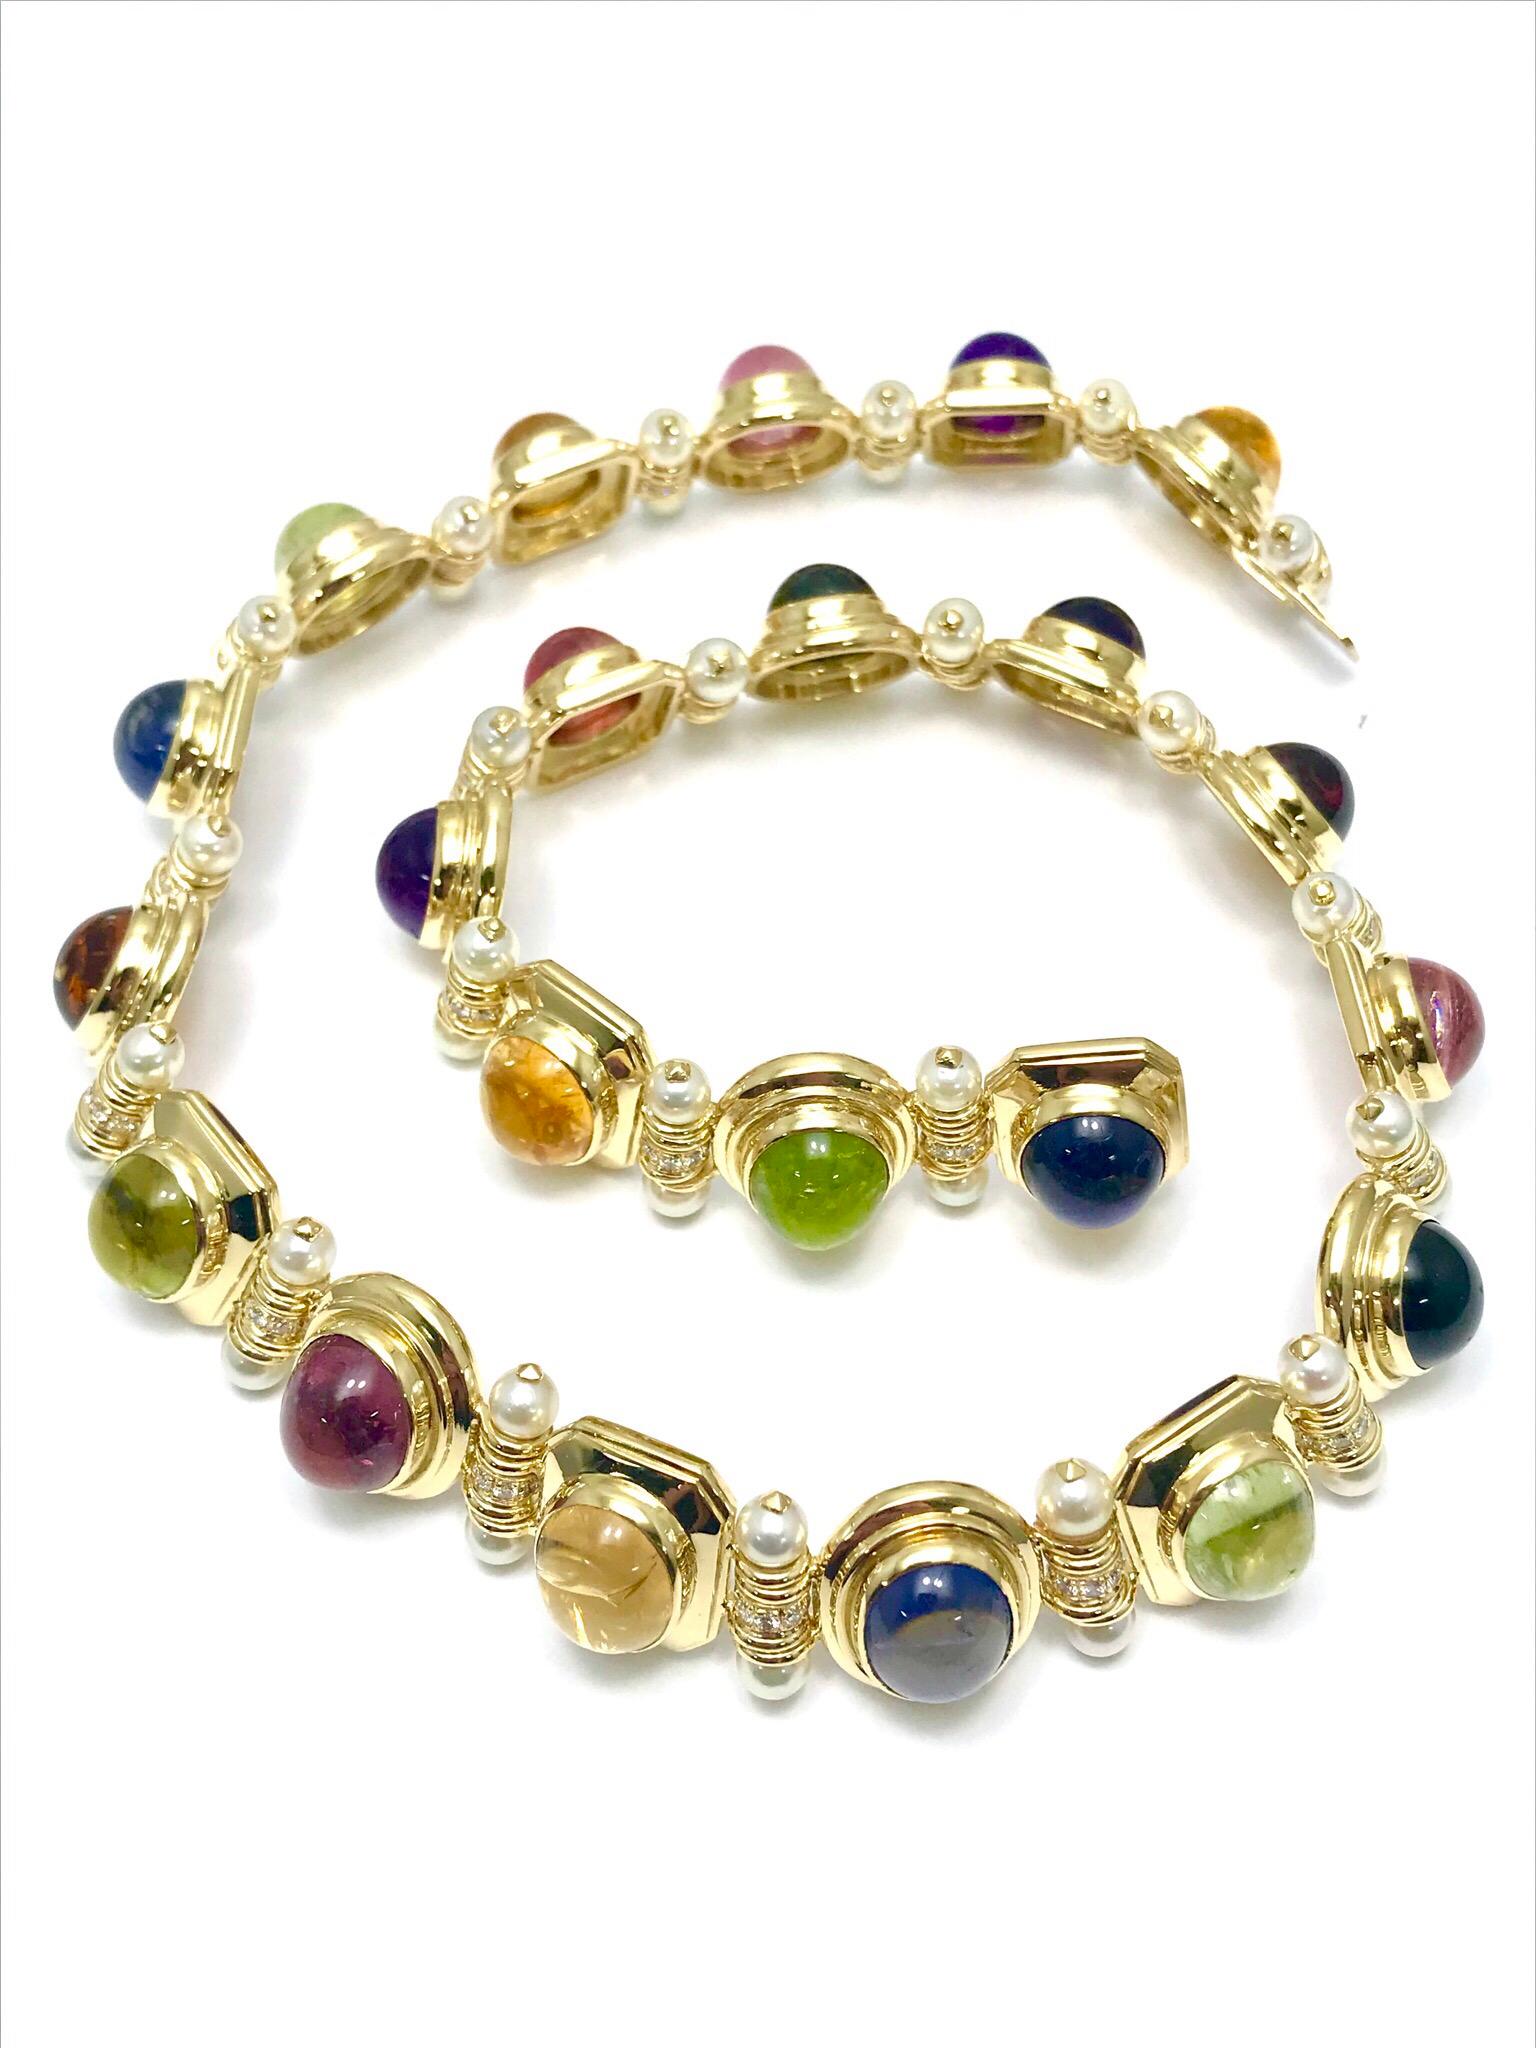 This is an exquisite Multi Gemstone Pearl and Diamond 18 karat yellow gold collar necklace.  The cabochon gemstones include Amethyst, Pink Tourmaline, Citrine, Garnet, Iolite, Amber, and Peridot, all of which are bezel set and linked together by a